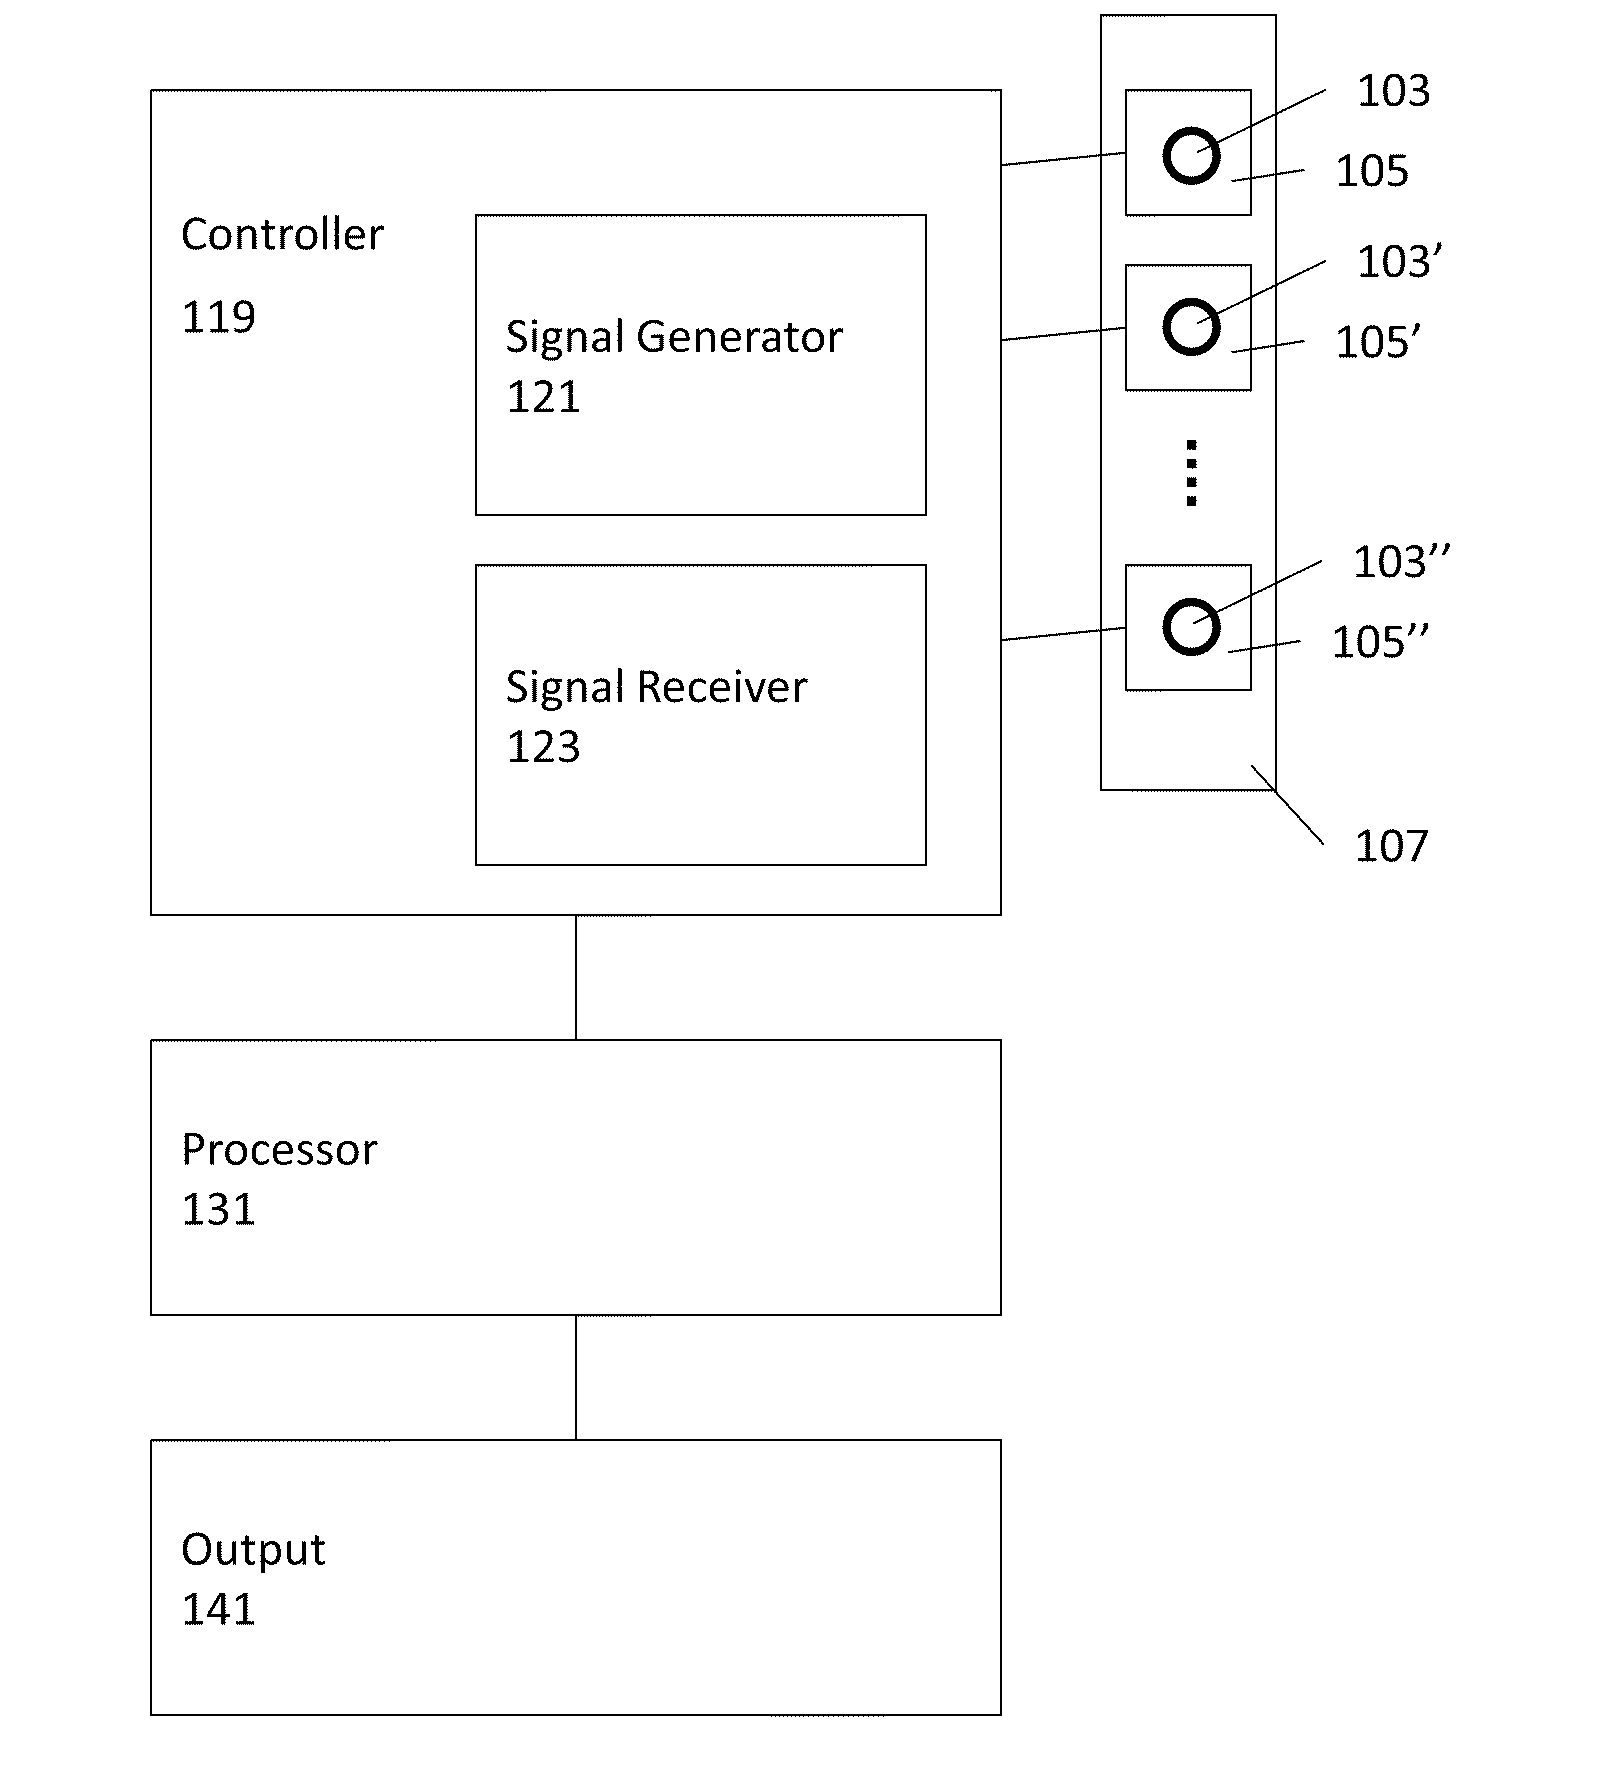 Systems and methods for the identification of compounds in medical fluids using admittance spectroscopy